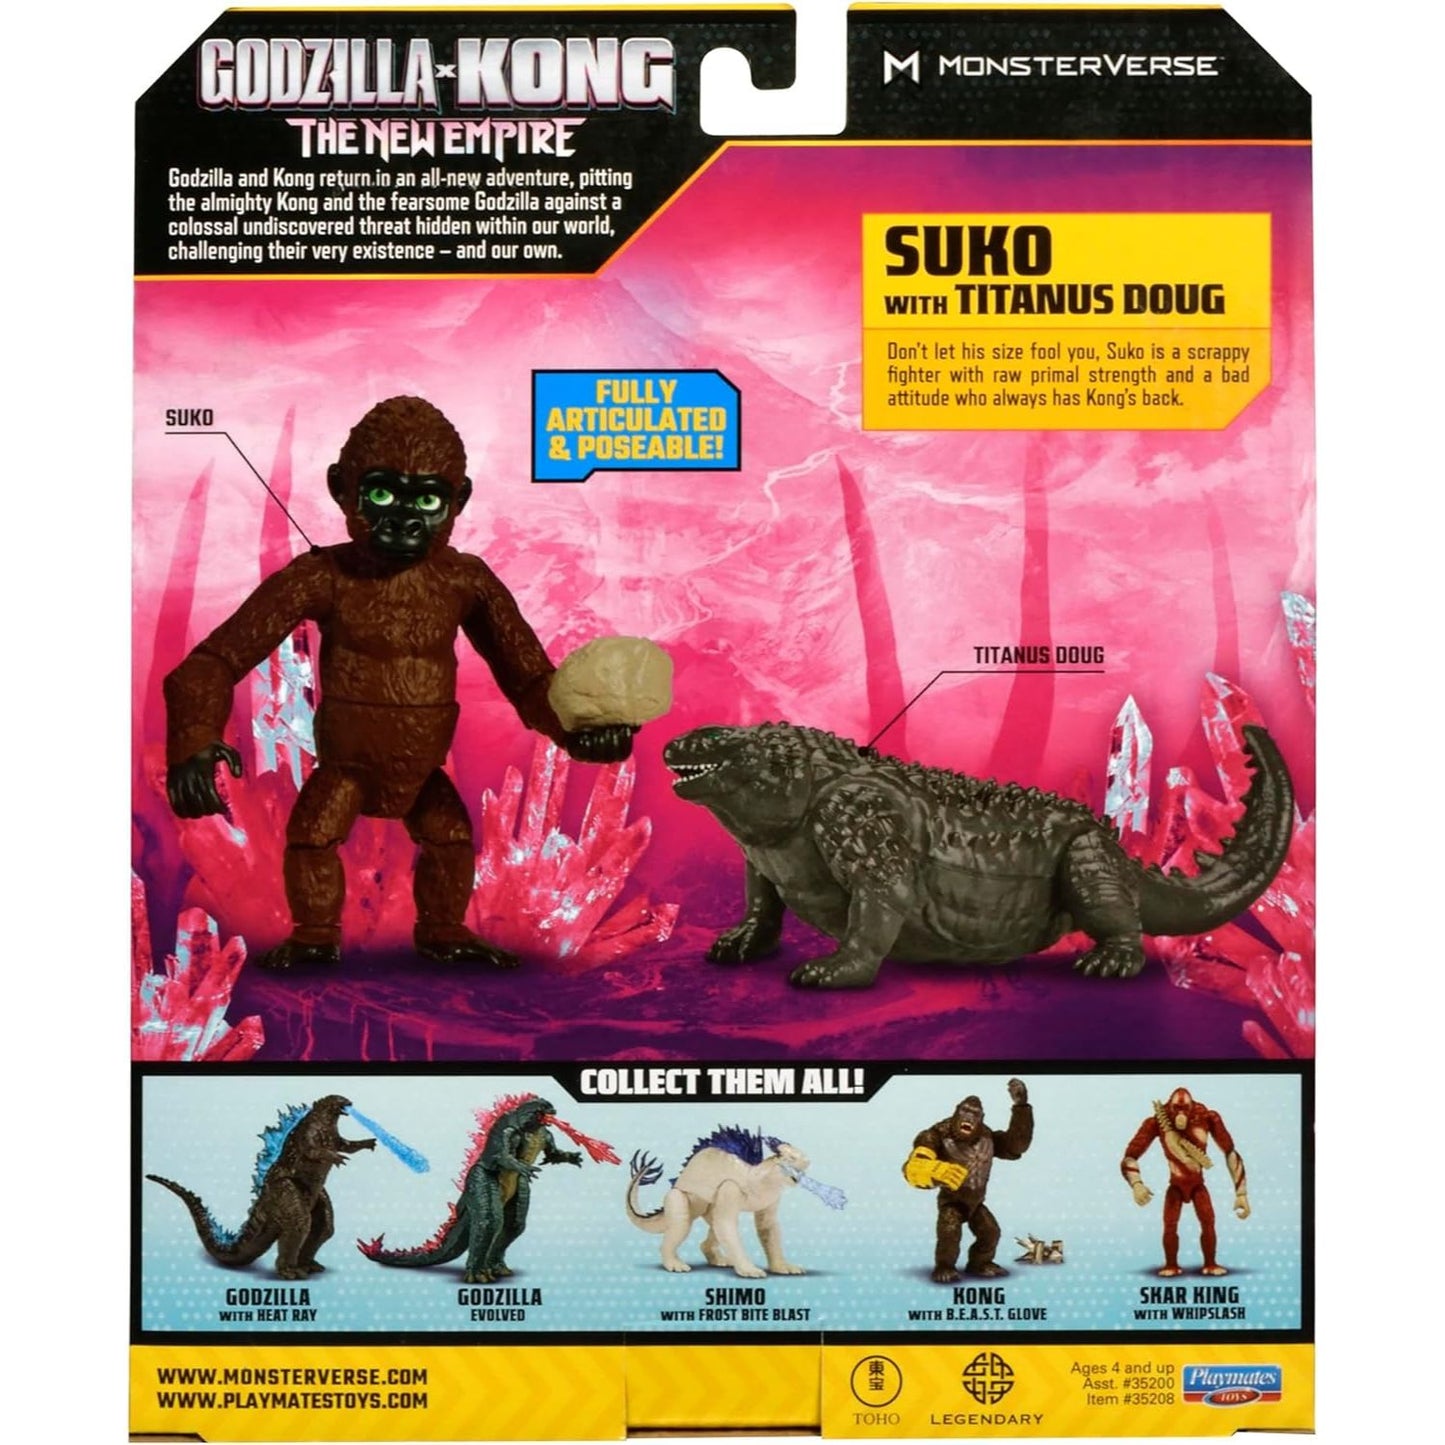 Godzilla x Kong : The New Empire - 6'' Suko Monster with Wart Dog by Playmates Toys